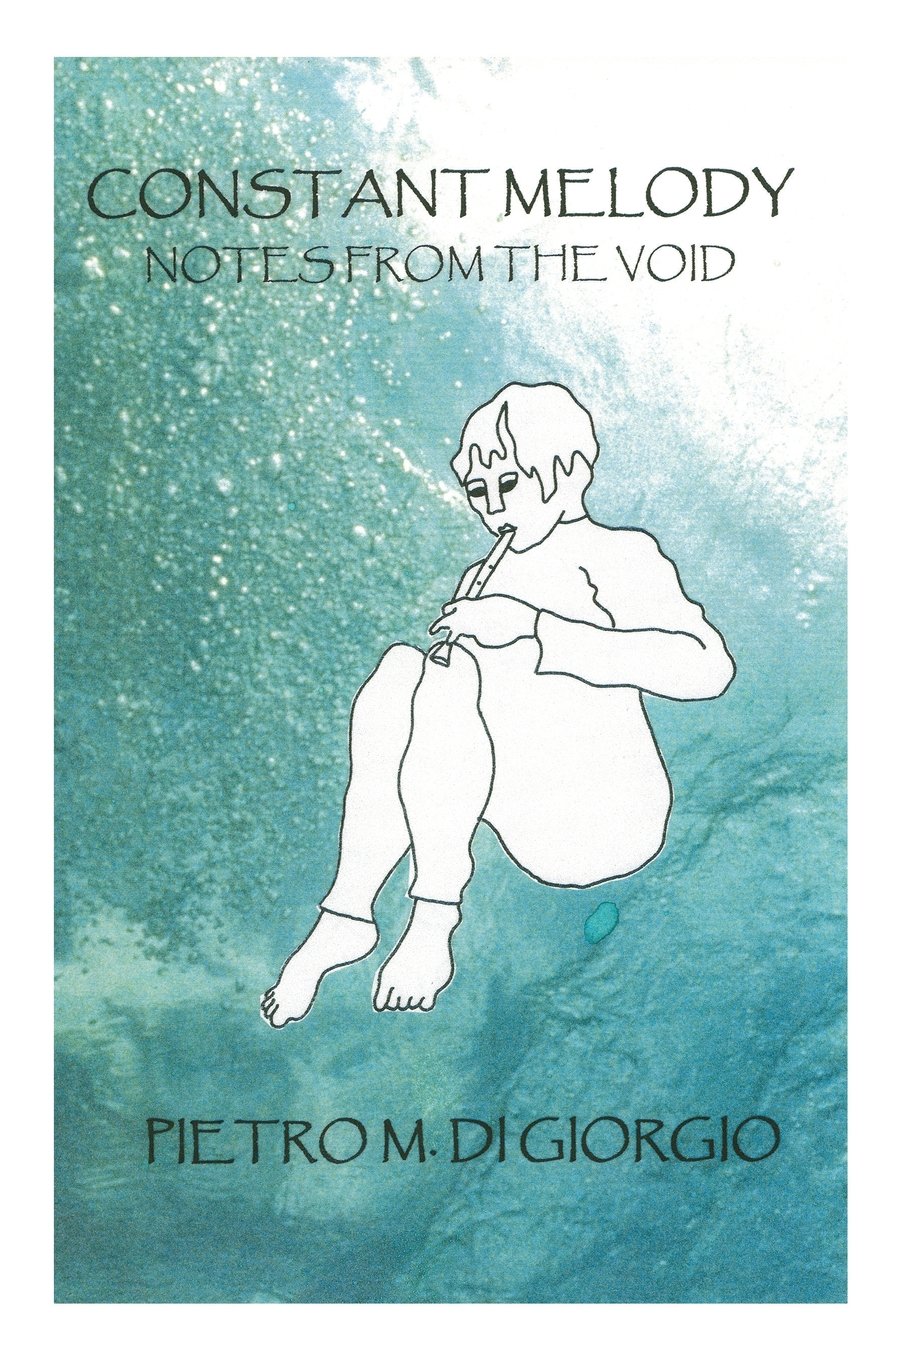 Constant Melody: Notes From The Void